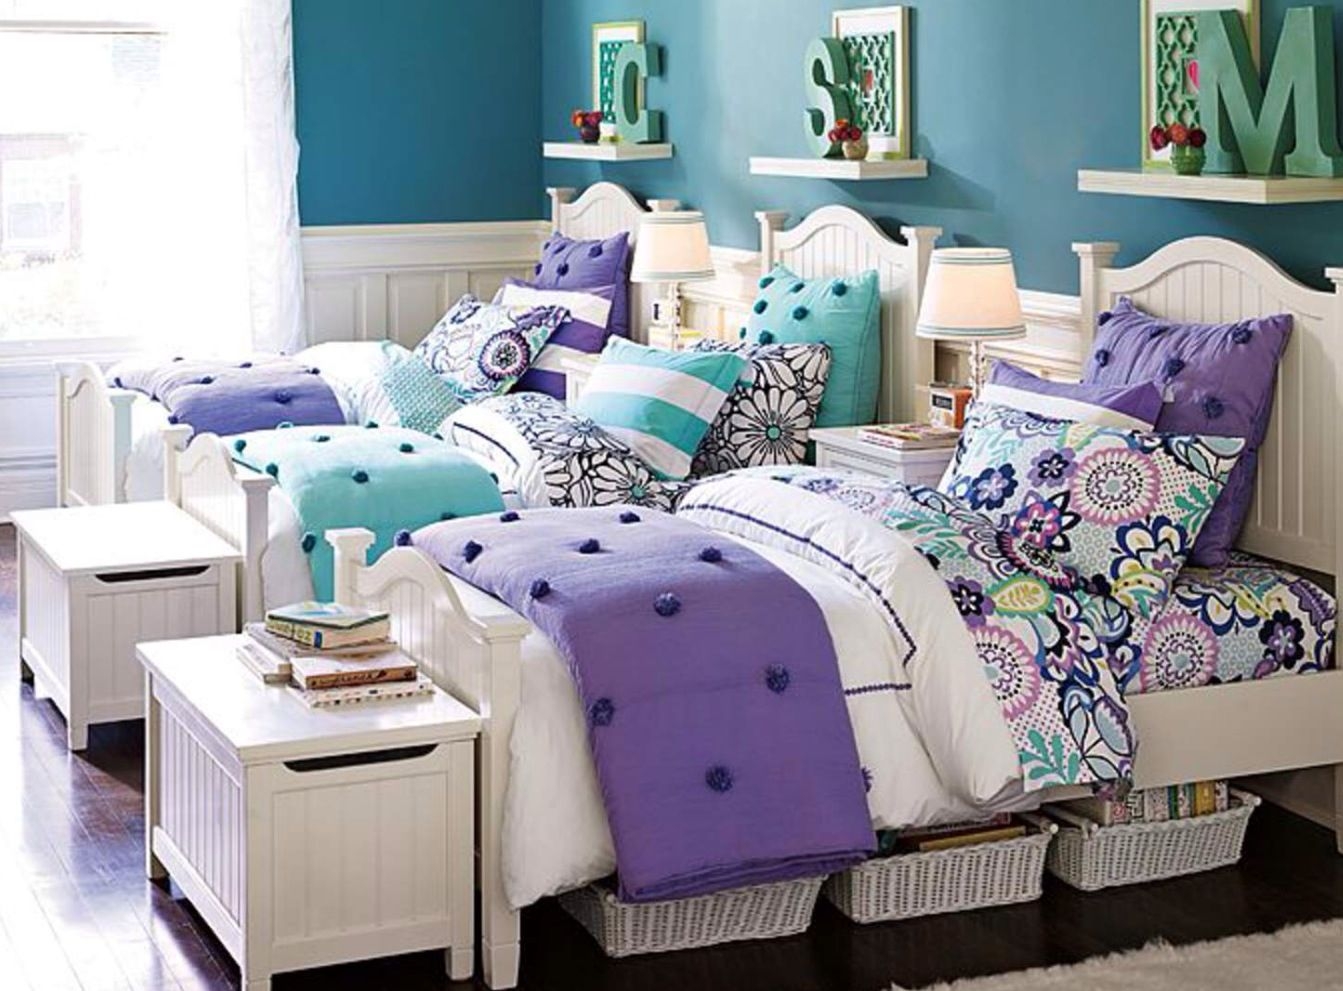 Twin Beds For Teenage Girl Visualhunt, Is Twin Bed Good For Teenager